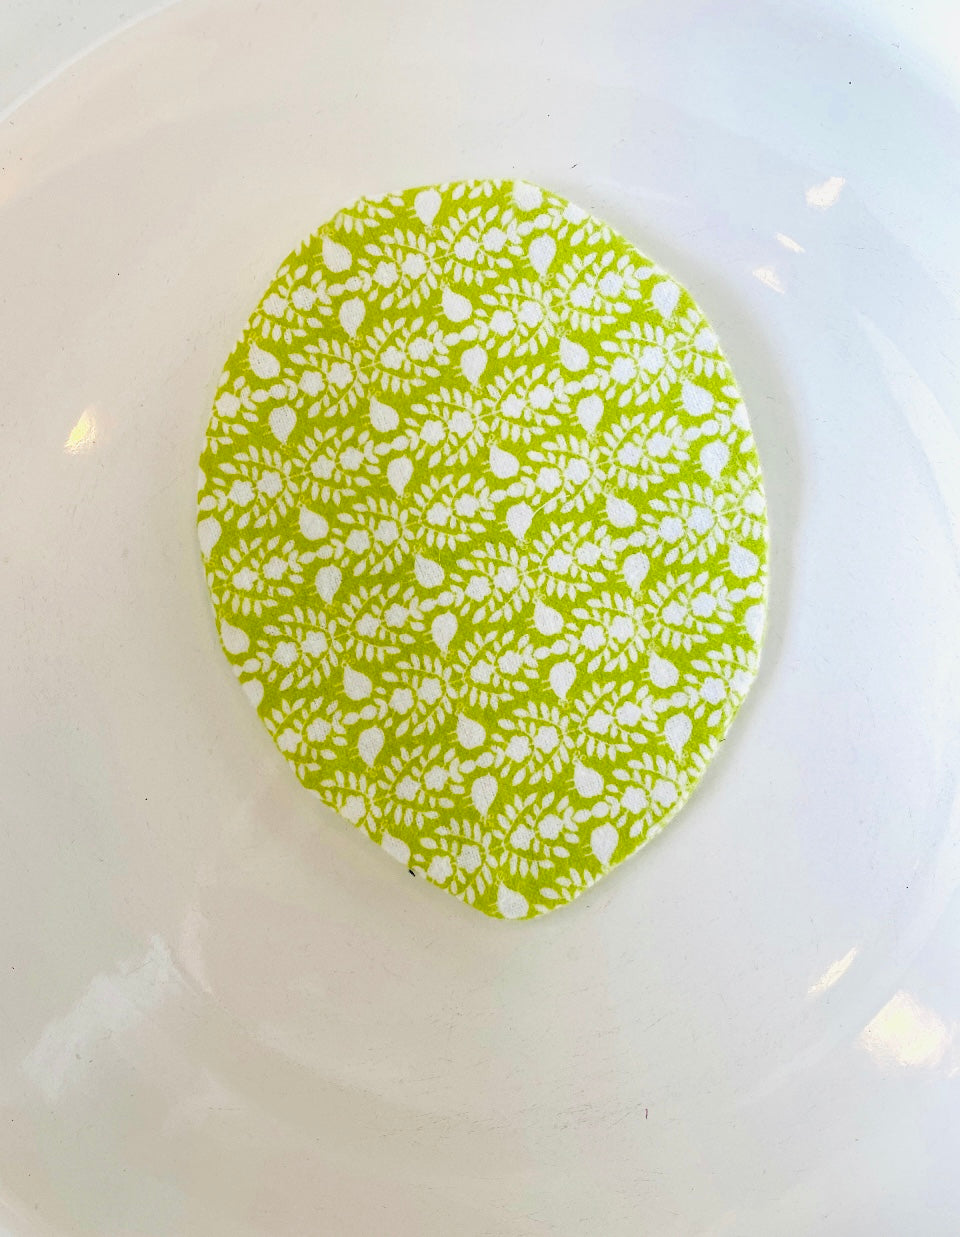 Fillable + Reusable Fabric Easter Eggs